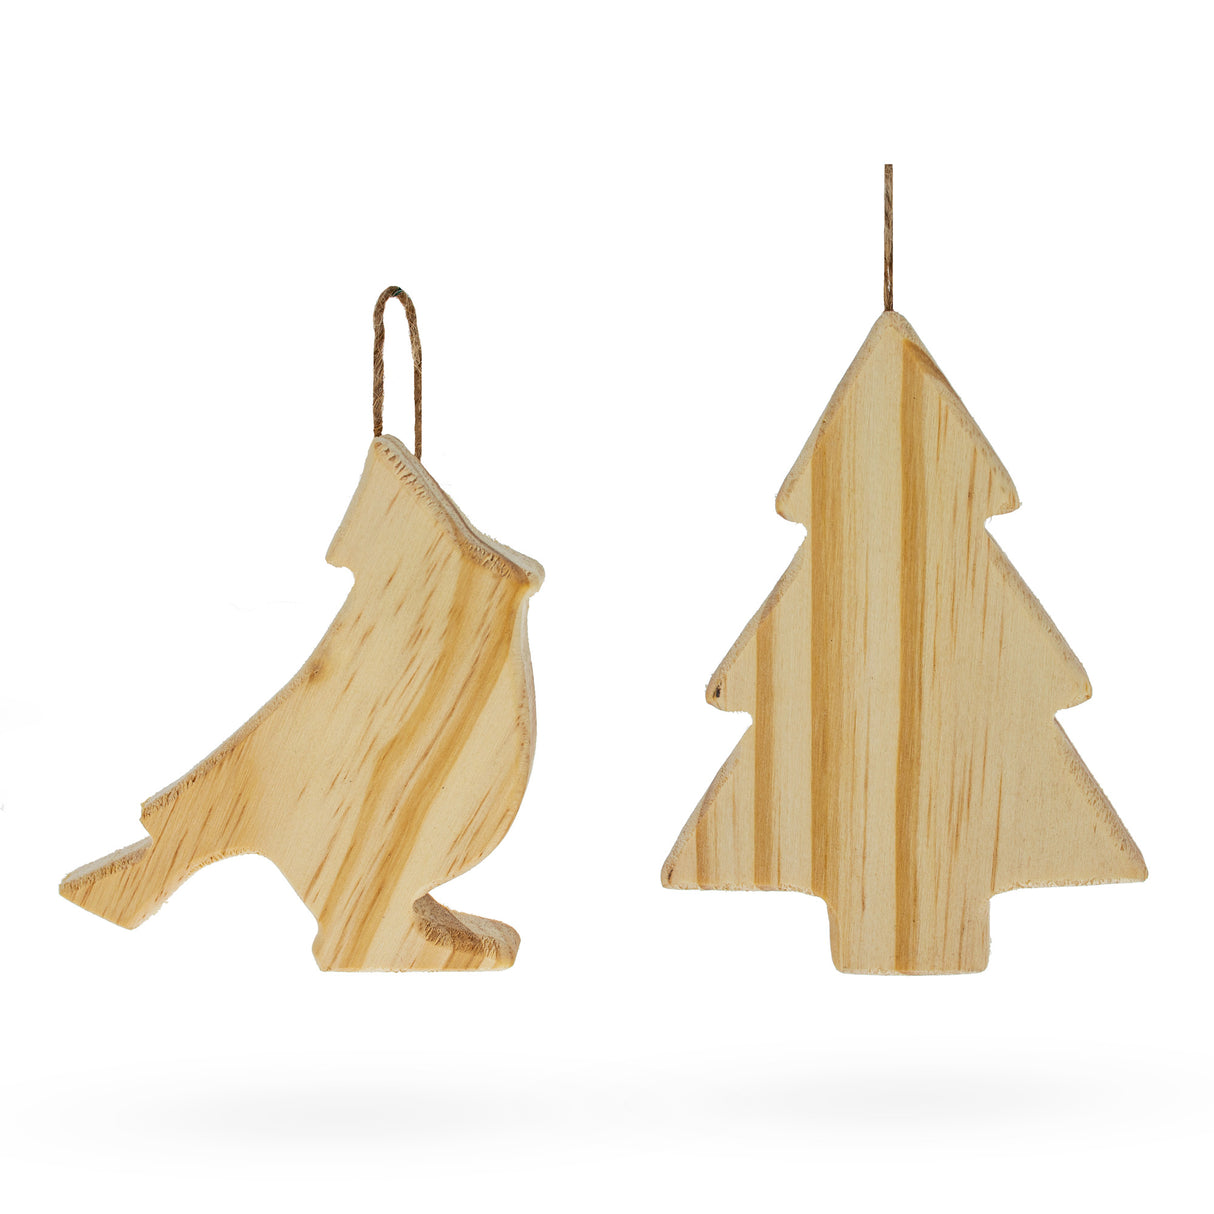 Set of 2 Unfinished Unpainted Wooden Bird and Christmas Tree Ornaments Cutouts DIY Craft 4.5 Inches in Beige color, Triangle shape